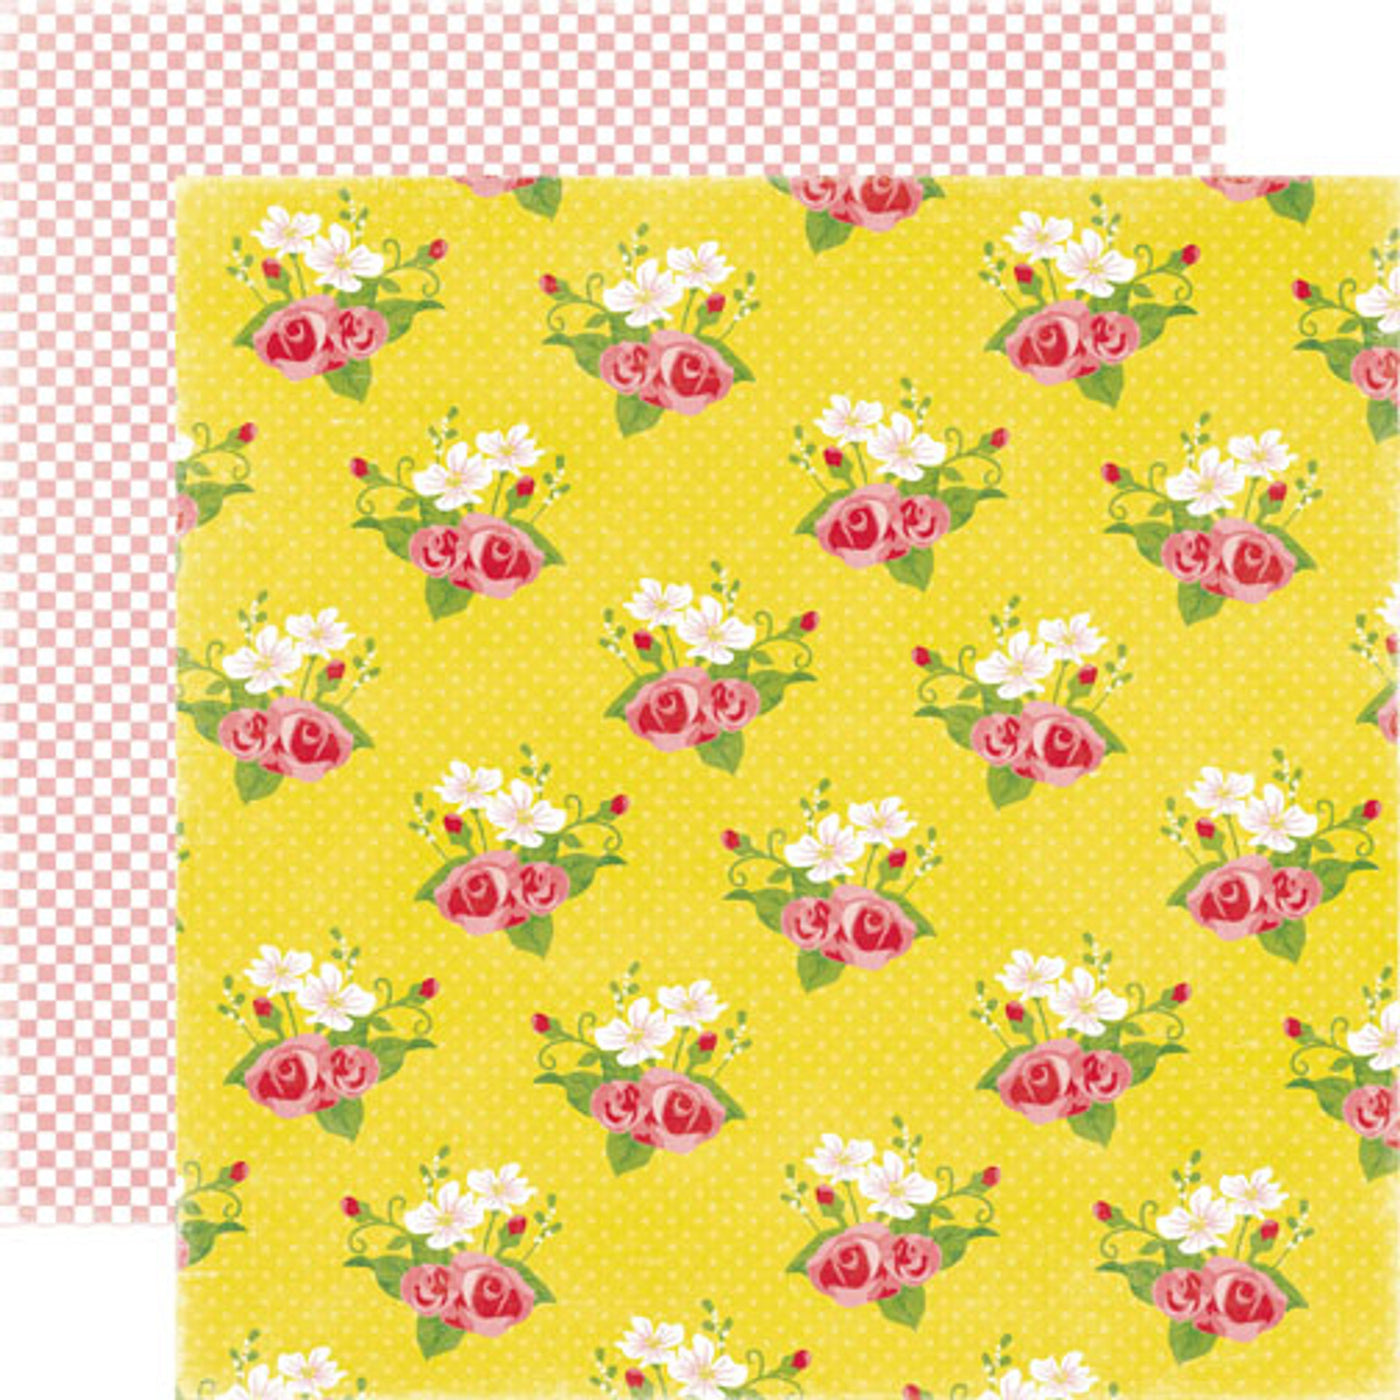 12x12 double-sided patterned paper. (Side A - white, yellow, and pink floral on a yellow background; Side B - white and bubblegum pink checkerboard pattern)